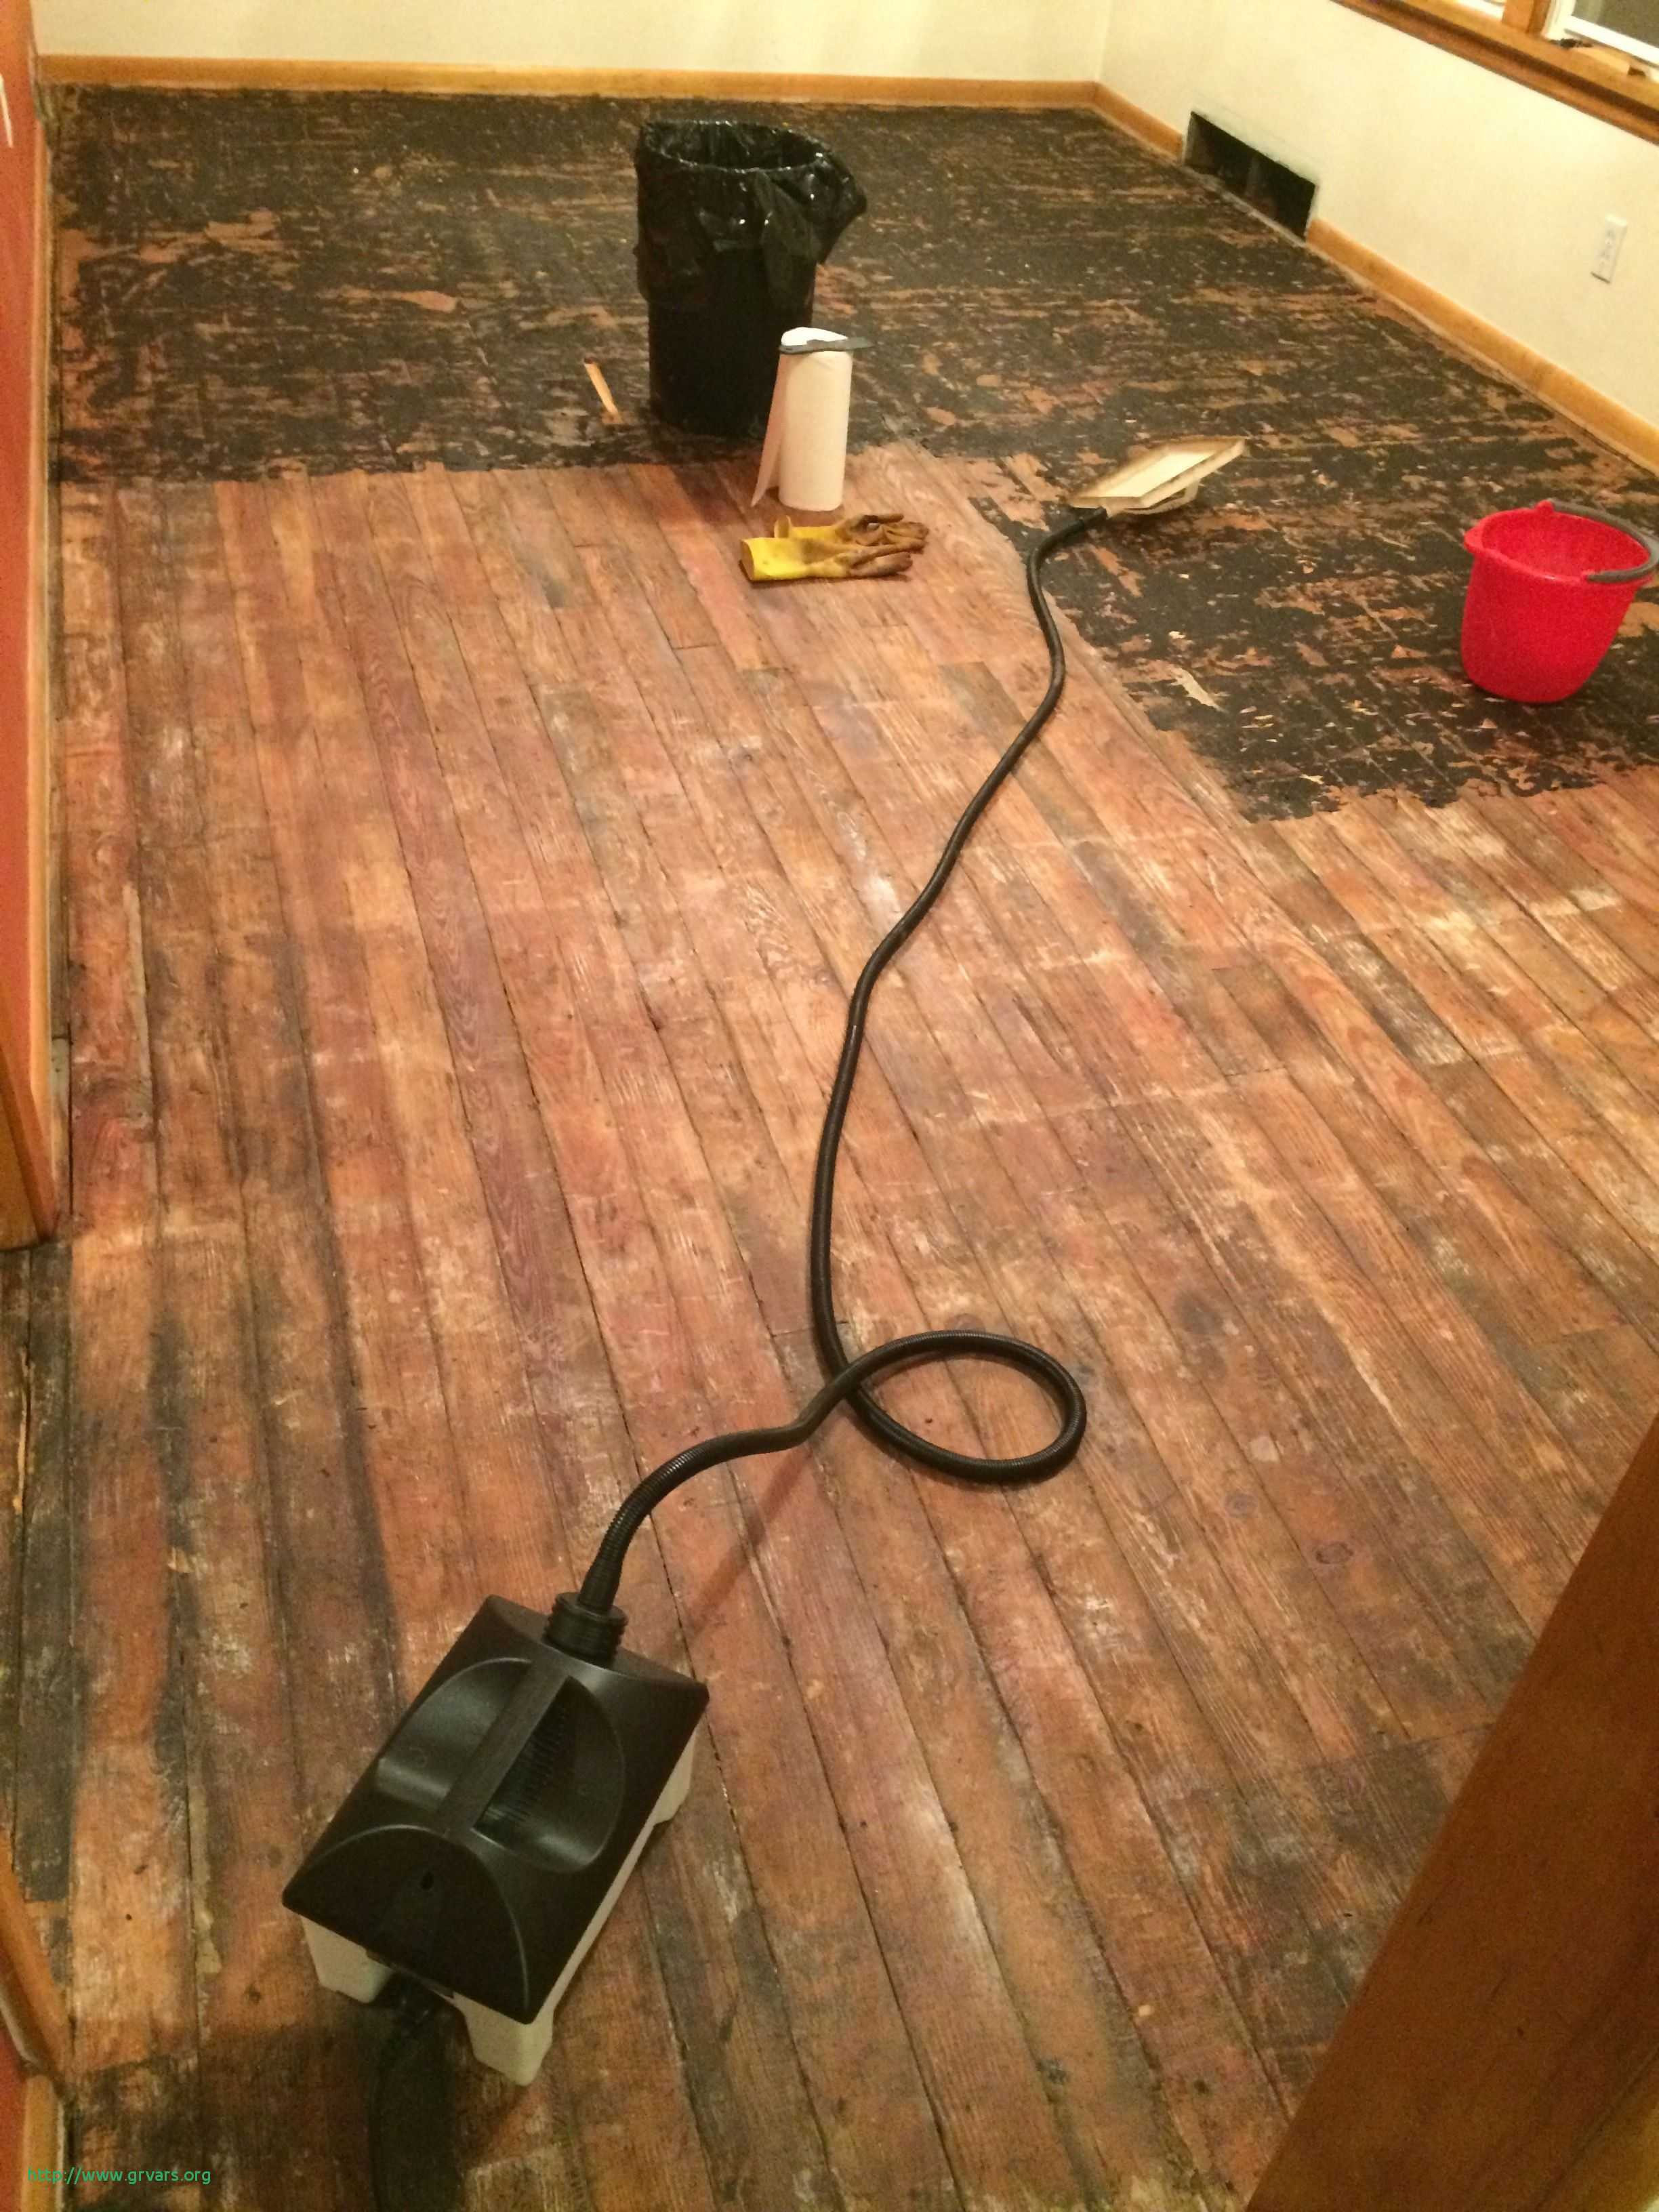 19 attractive Glue Down Hardwood Floor 2024 free download glue down hardwood floor of 23 nouveau how to remove glued down wood flooring on concrete intended for removing glue from hardwood floors luxury removing old tar paper and glue from hardwood